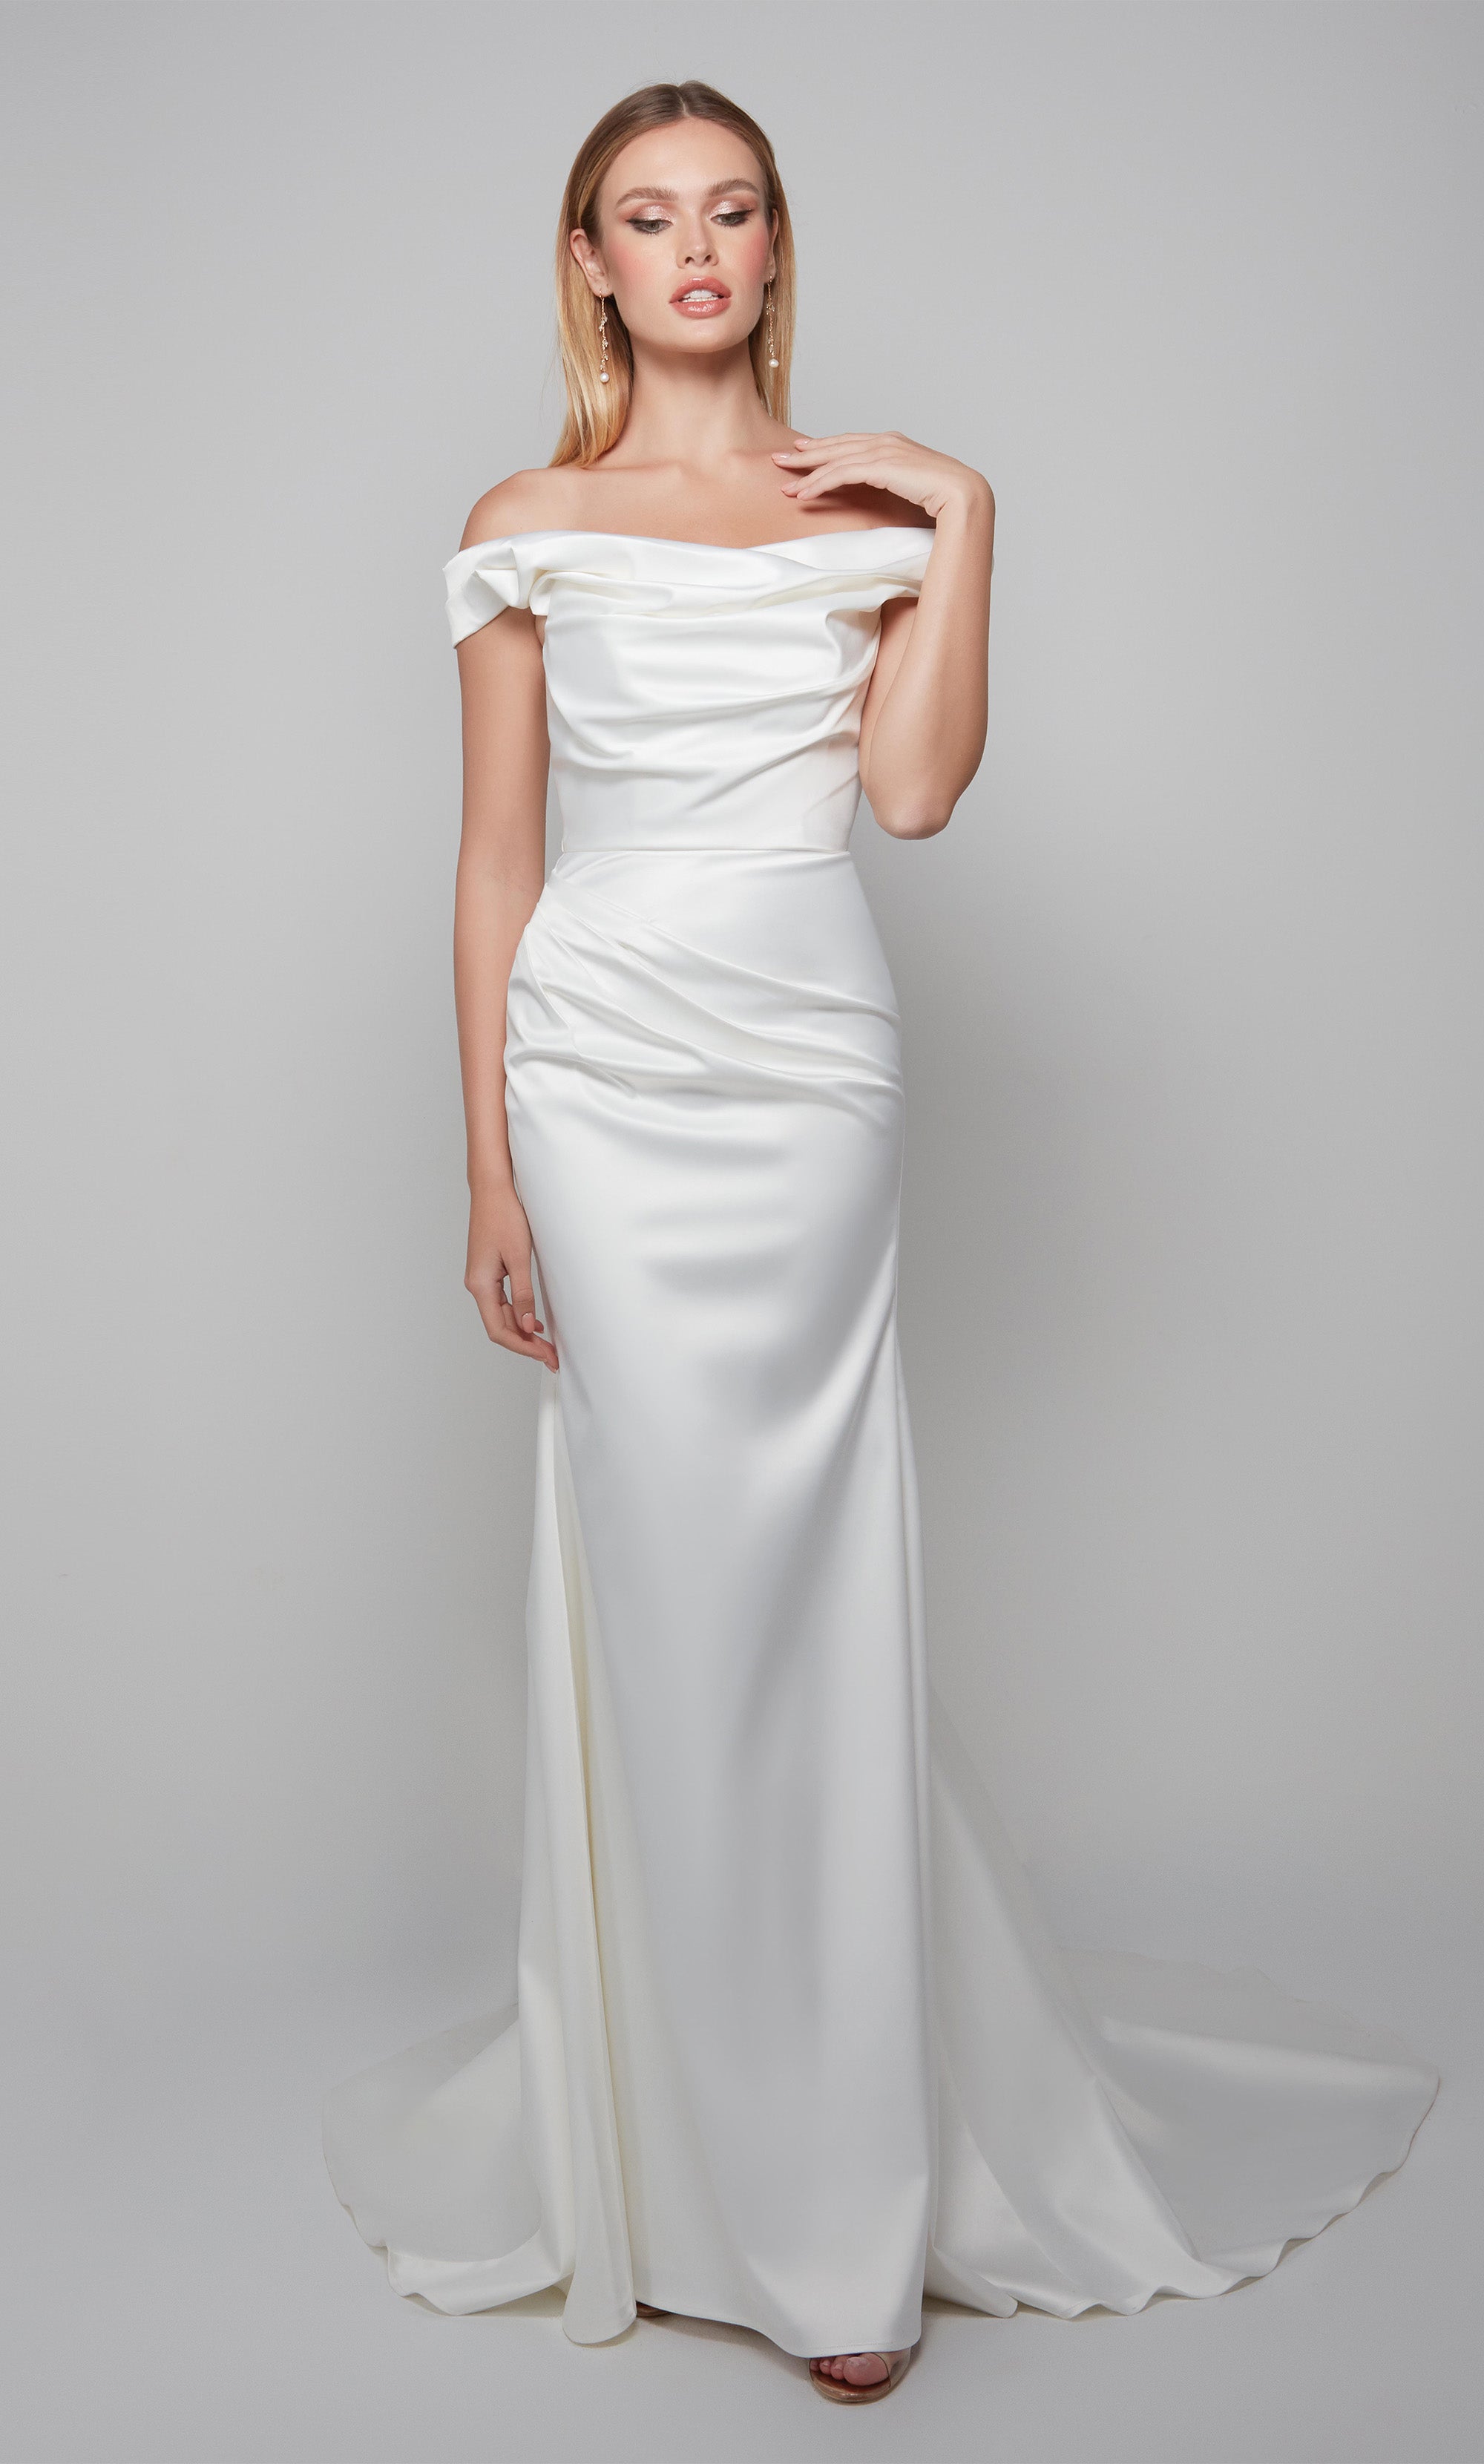 WHAT COLOURS TO WEAR WITH AN IVORY WEDDING DRESS — IVORY BLACK